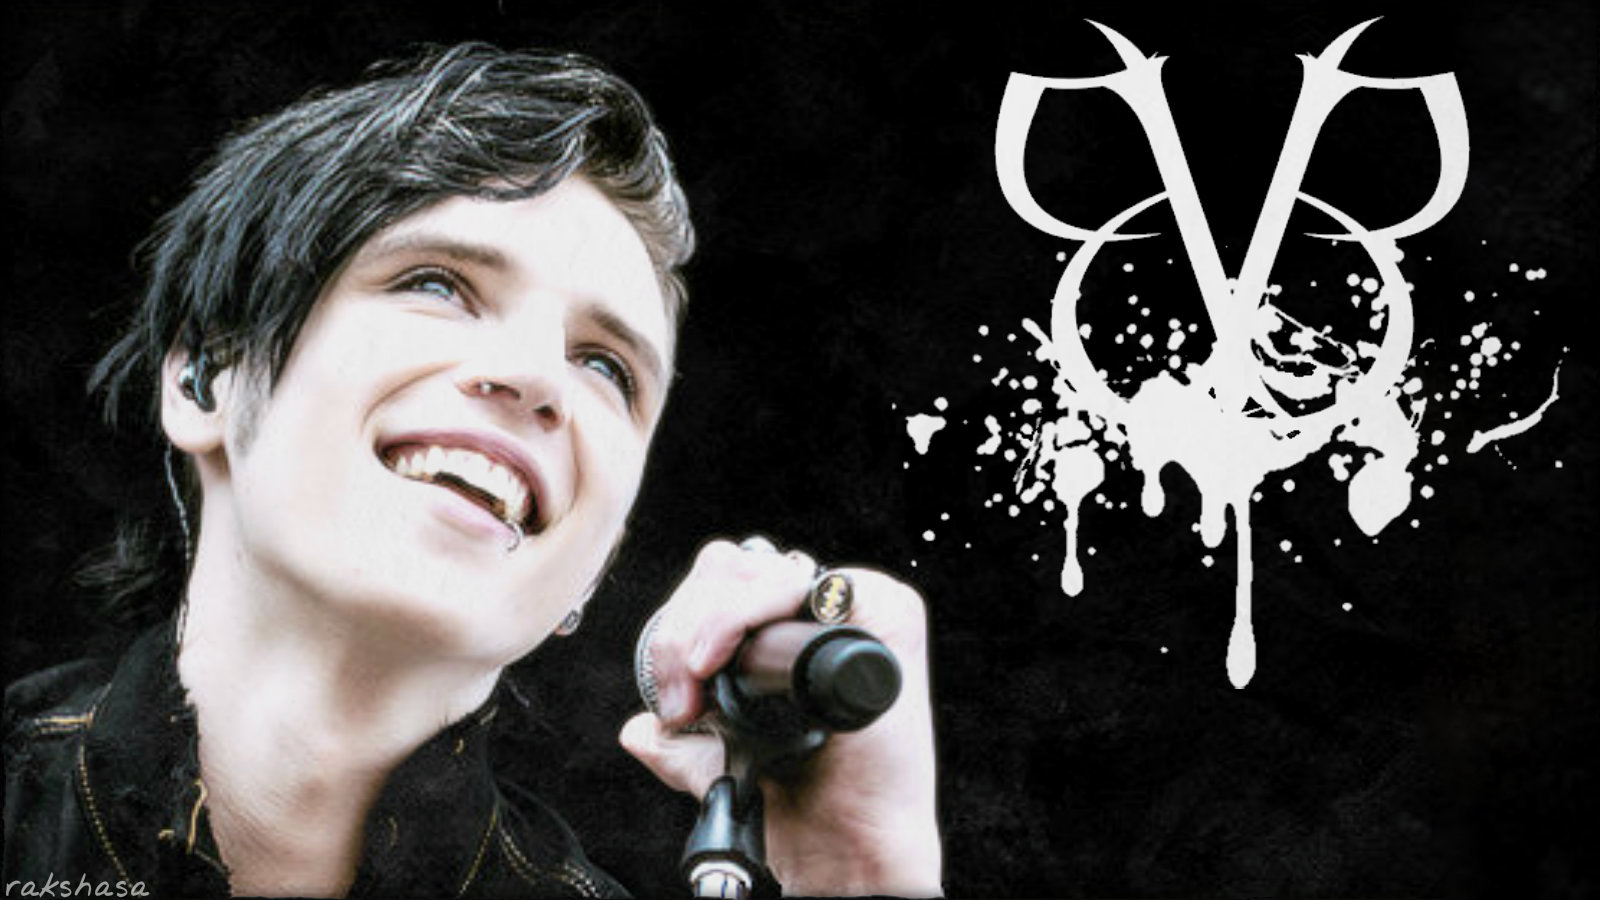 Andy Sixx Images Andy Biersack HD Wallpaper And Background Photos.